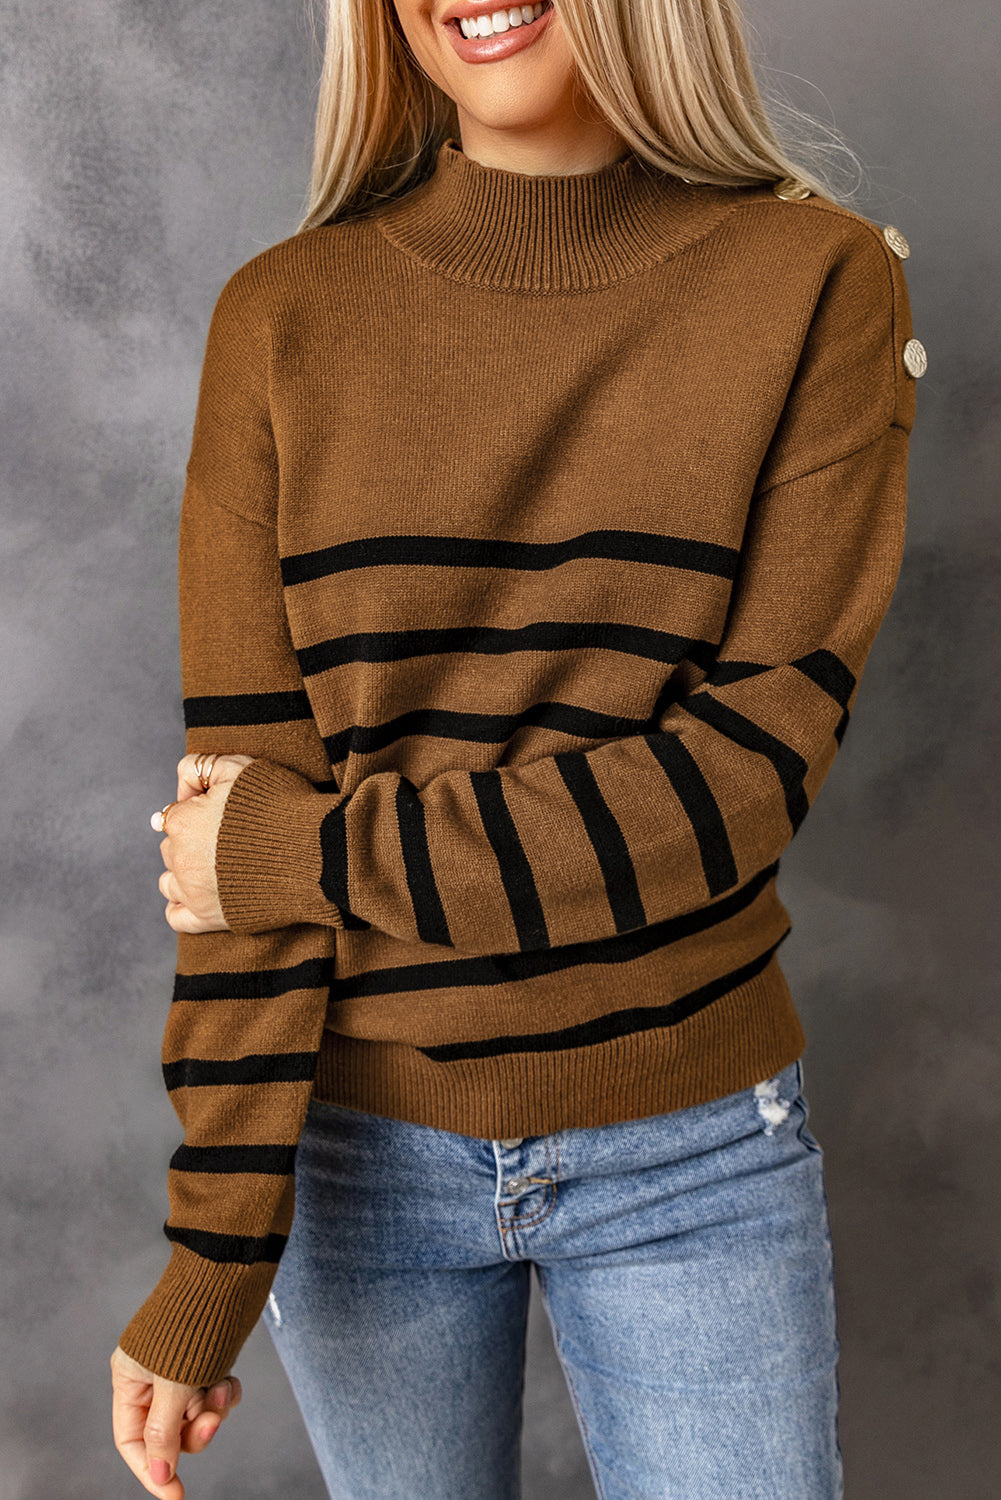 Khaki Striped Turtleneck Long Sleeve Sweater with Buttons